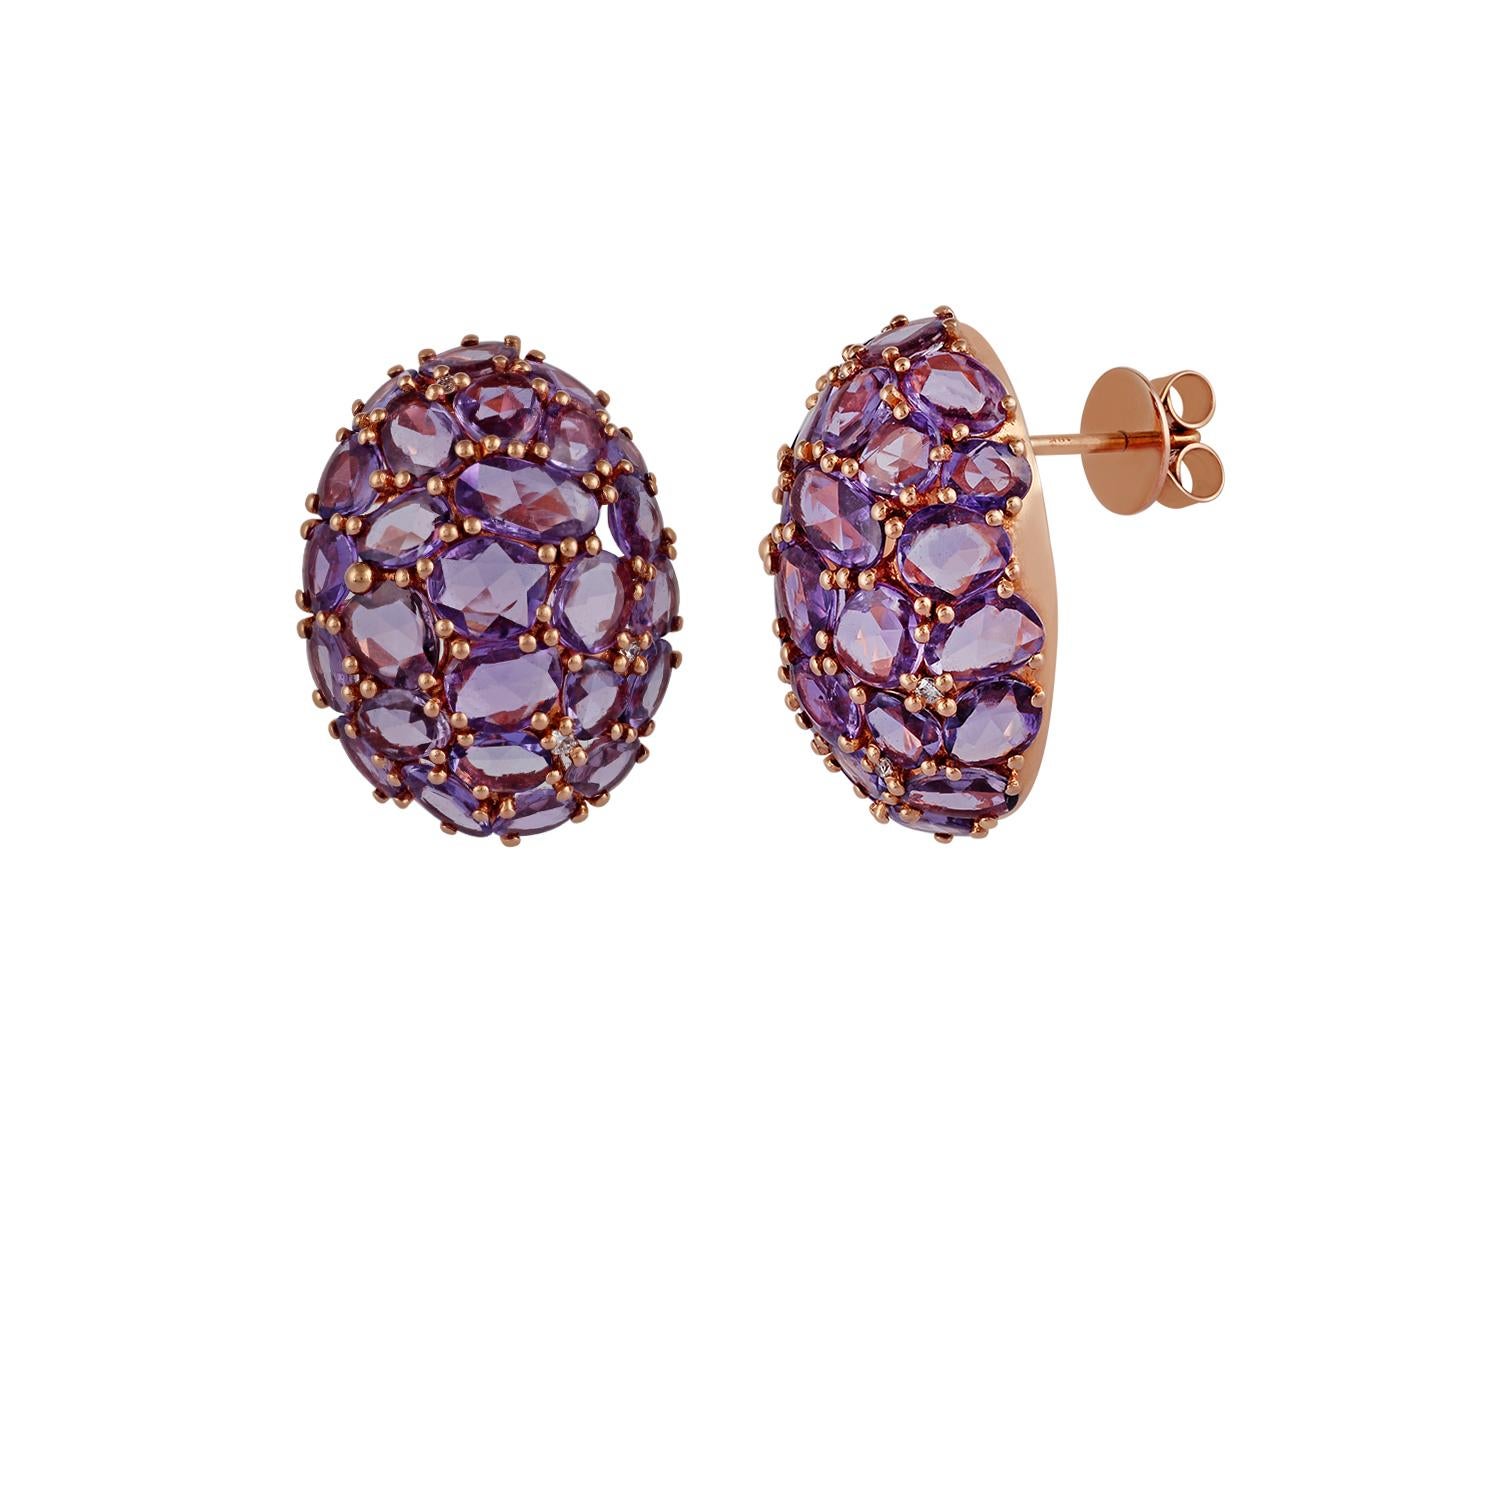 Contemporary Pink Sapphire and Diamond Earrings Studded in 18 Karat Rose Gold